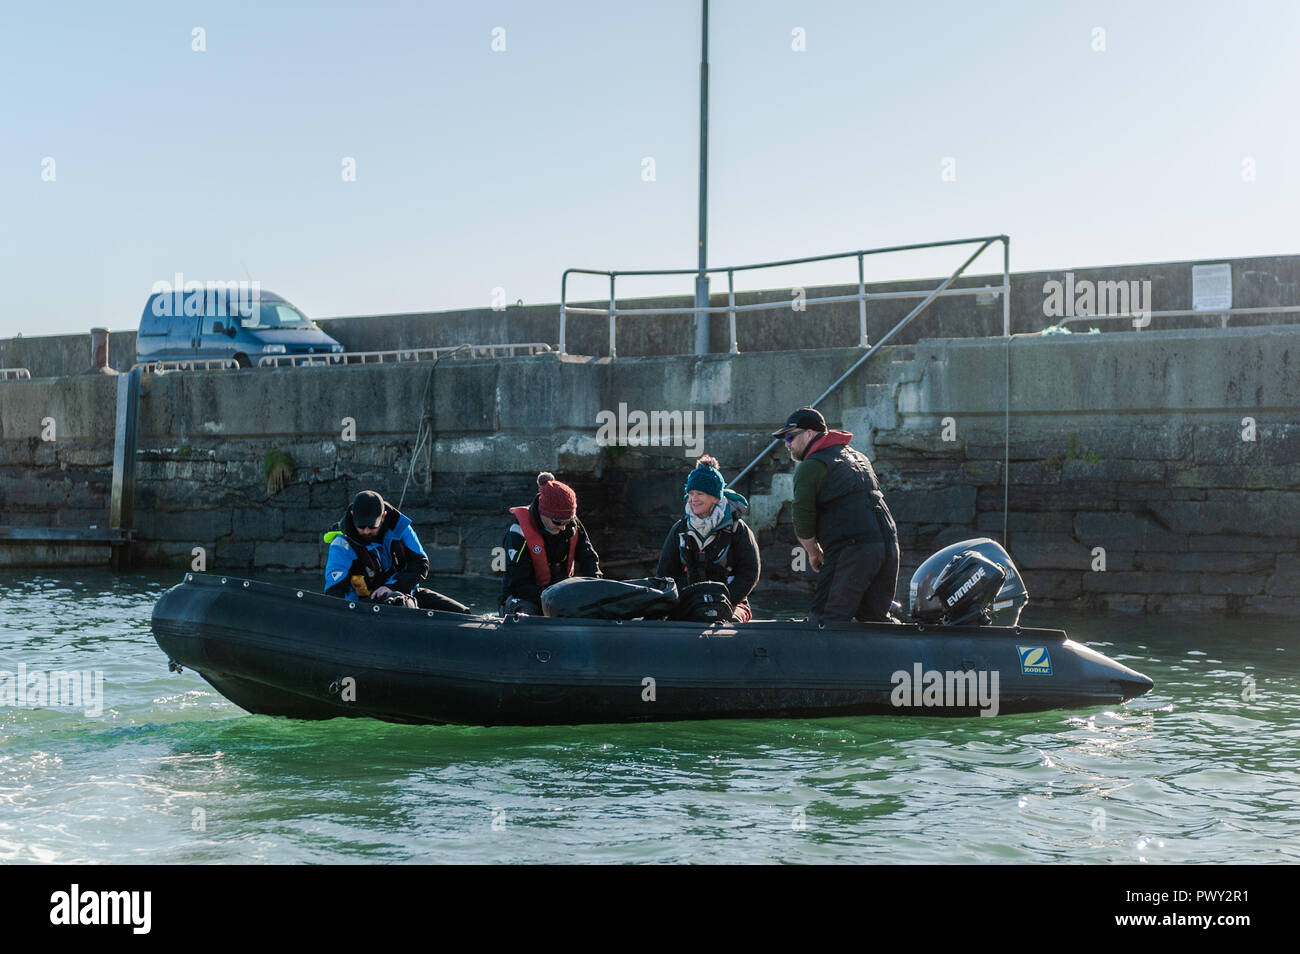 Schull, West Cork, Ireland. 18th Oct, 2018. Members of the National Parks and Wildlife Service aboard their RIB to spend a day counting seals and their pups around the islands near Schull as part of the Irish Government's conservation policy. The day will be dry and bright with sunny spells and temperatures of 11 to 14°C. Credit: Andy Gibson/Alamy Live News. Stock Photo